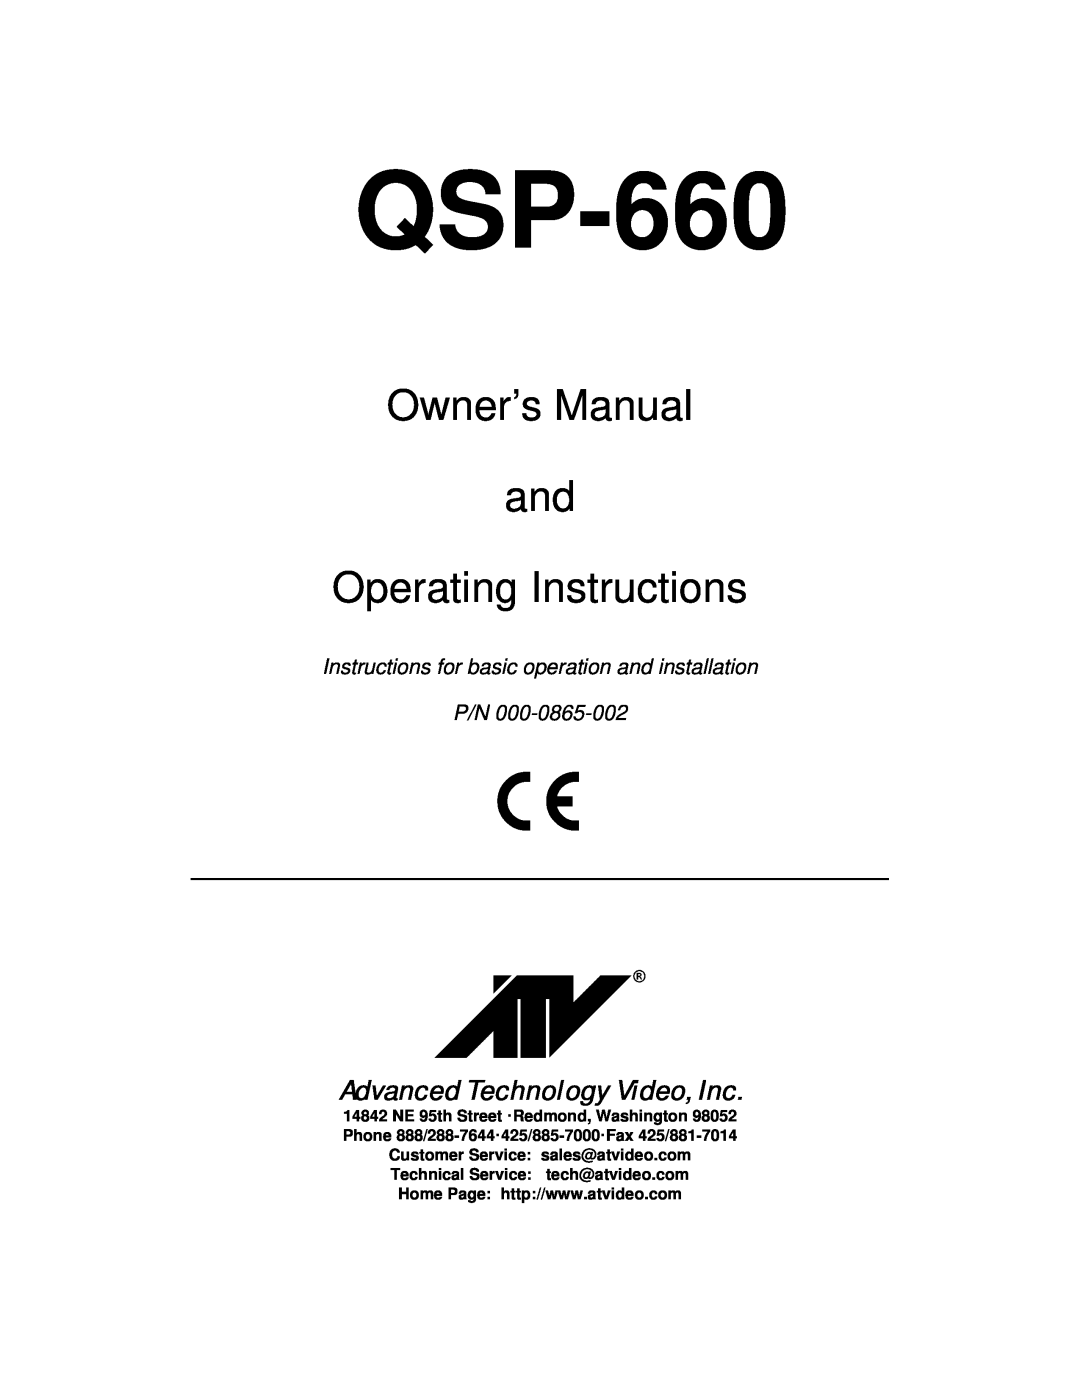 Advanced Global Technology QSP-660 manual Owner’s Manual and Operating Instructions, Advanced Technology Video, Inc 